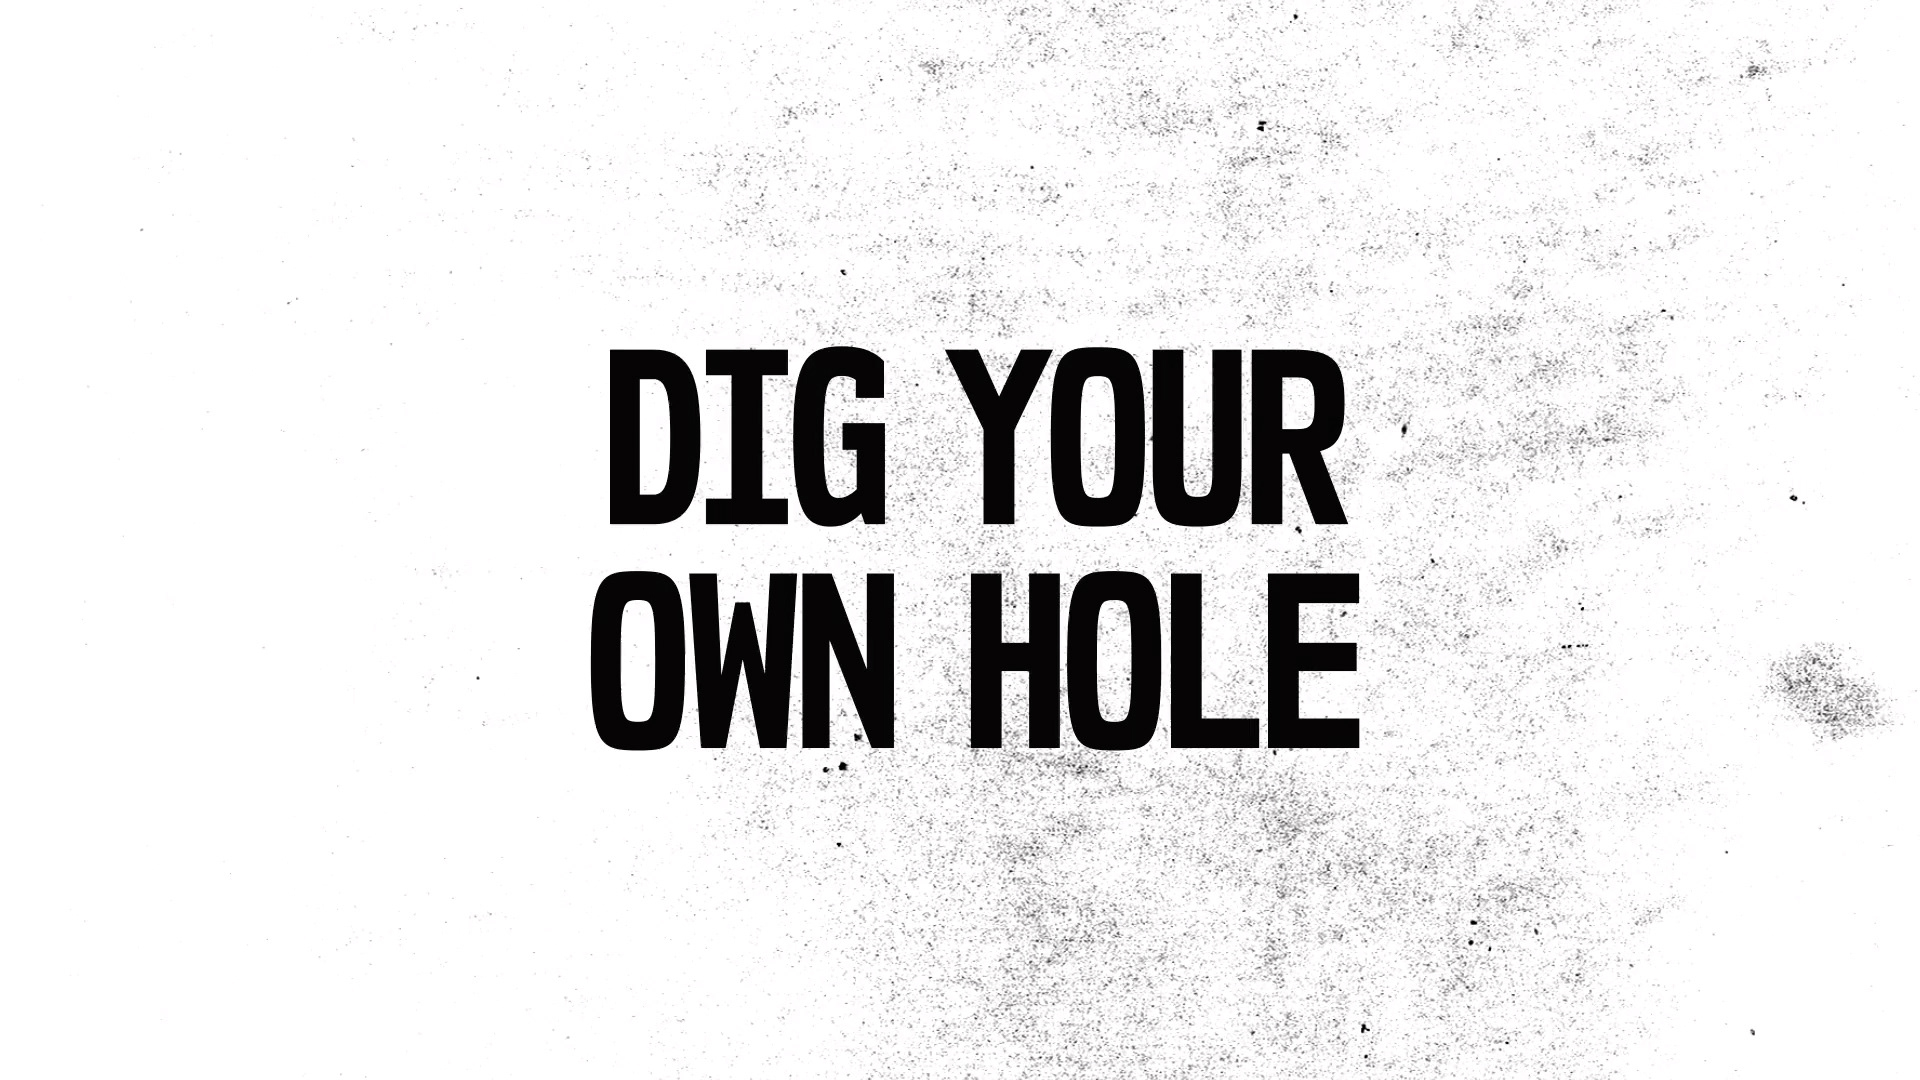 Dig your